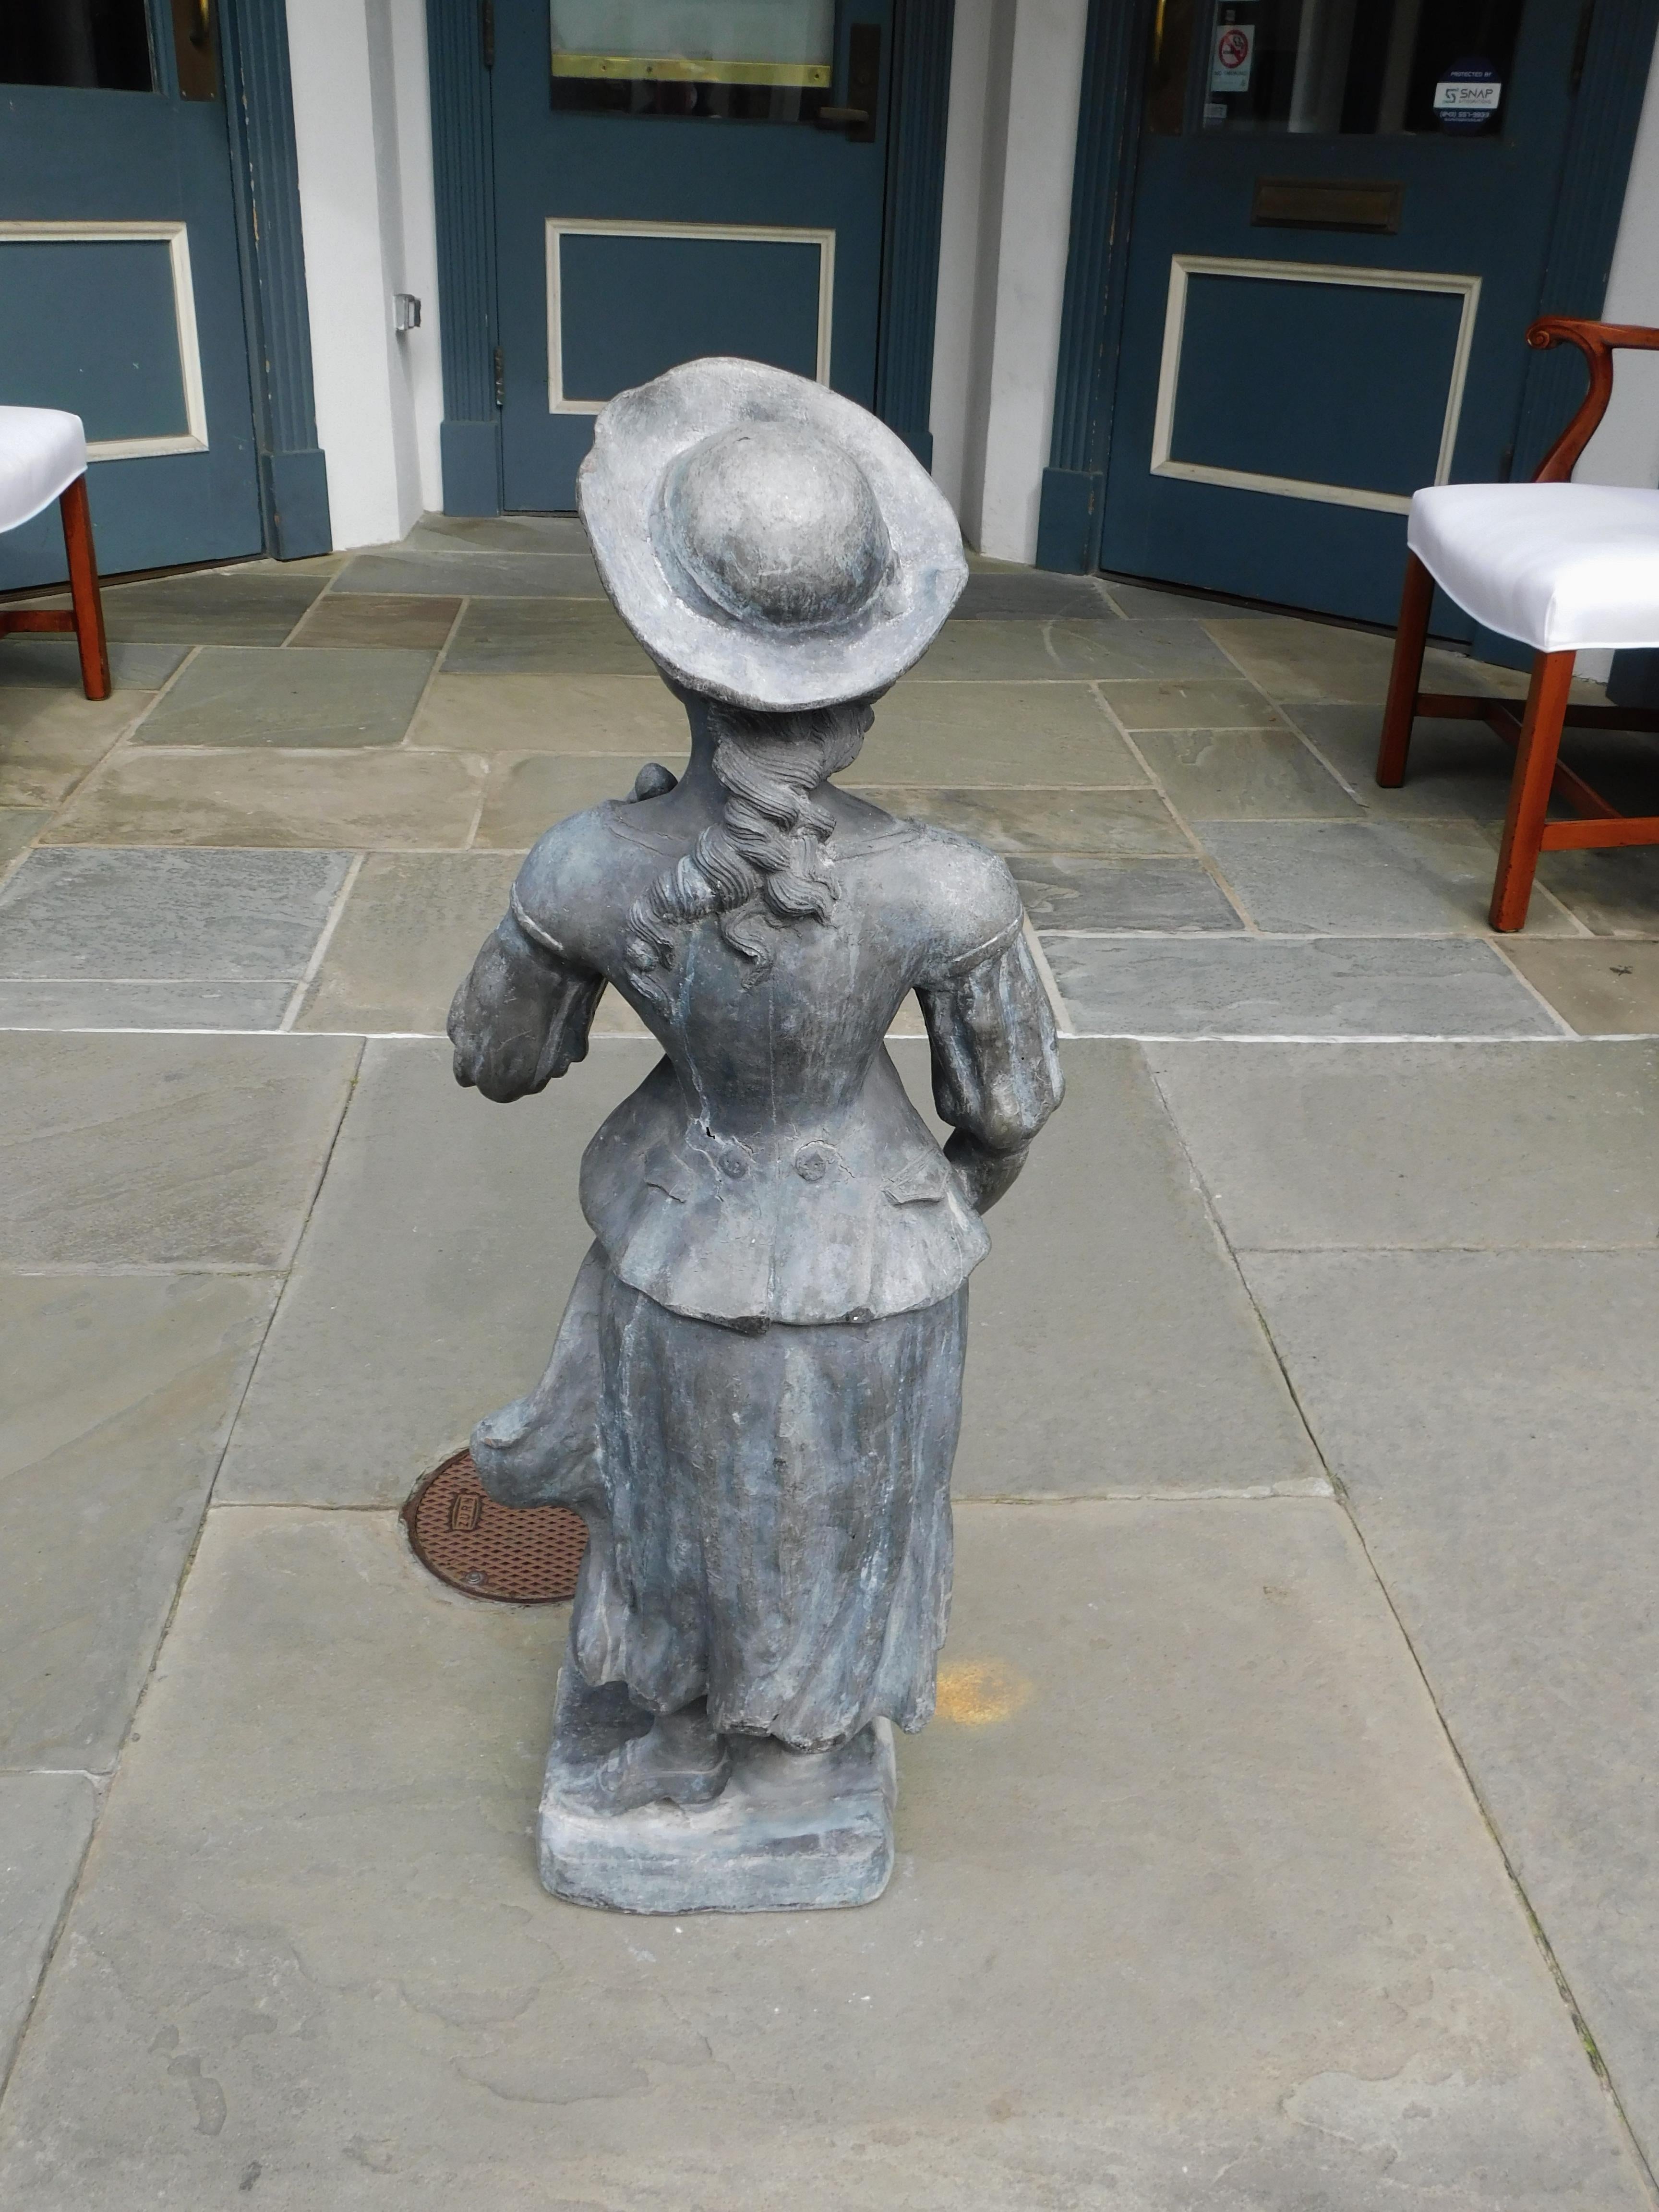 Mid-19th Century English Lead Figural Lady Garden Statue Standing on Squared Plinth, circa 1850 For Sale